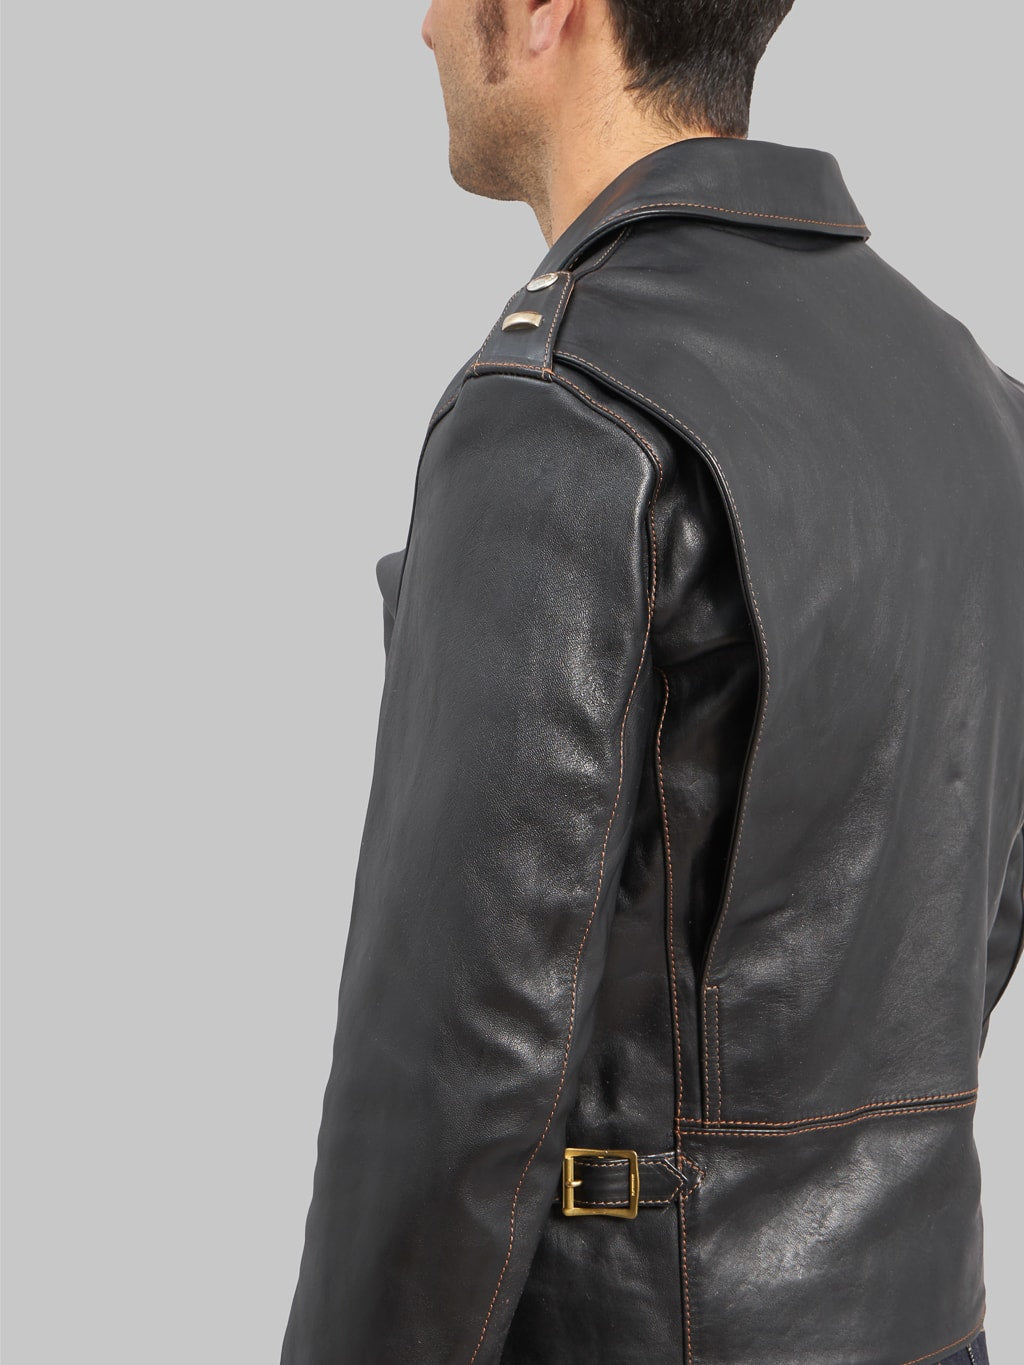 The Flat Head Horsehide Double Riders Jacket Black teacore leather